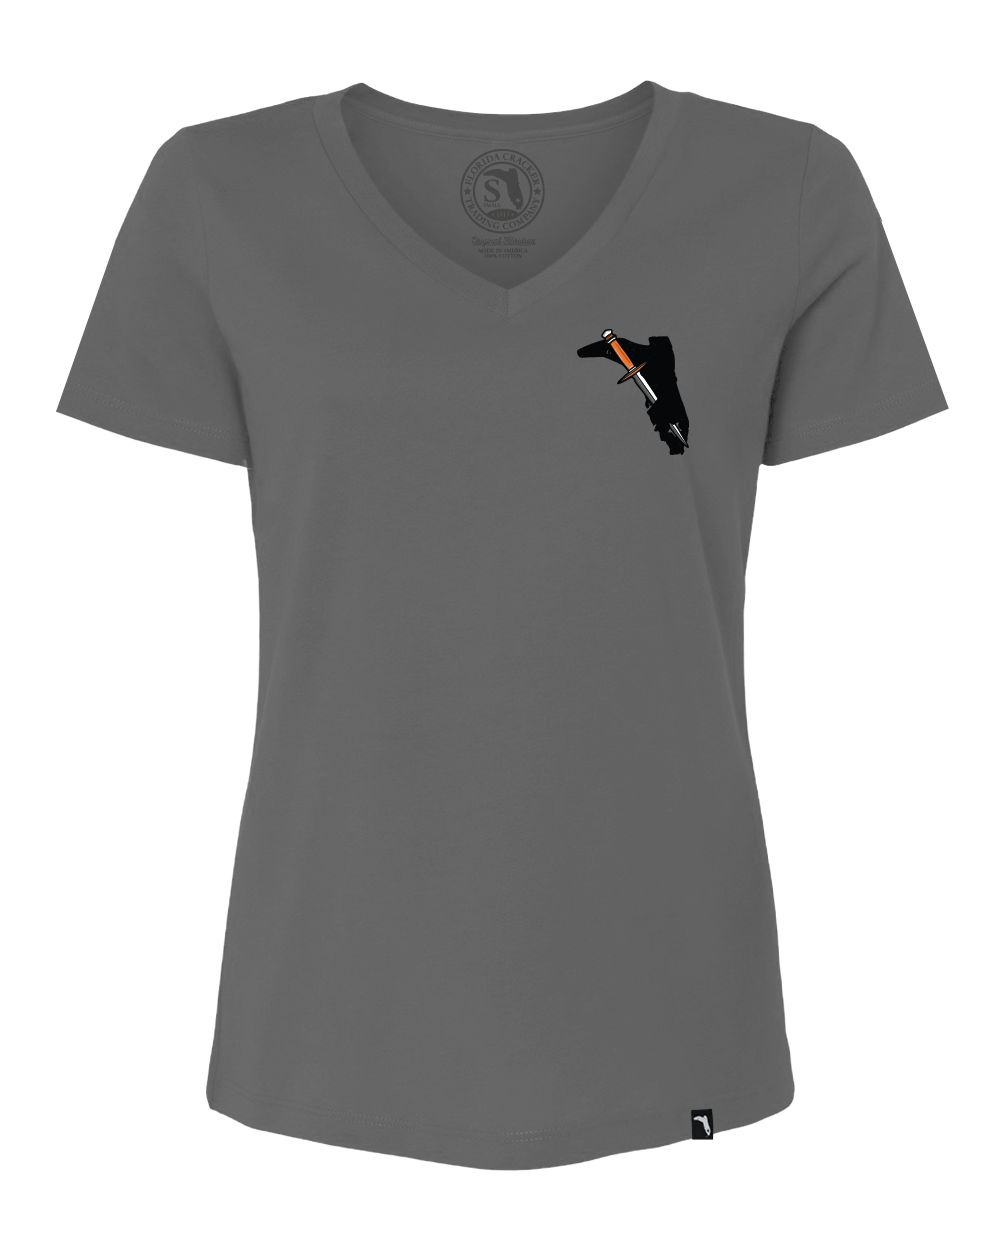 TAILGATE COLLECTION TAMPA BAY V-NECK - GRAY